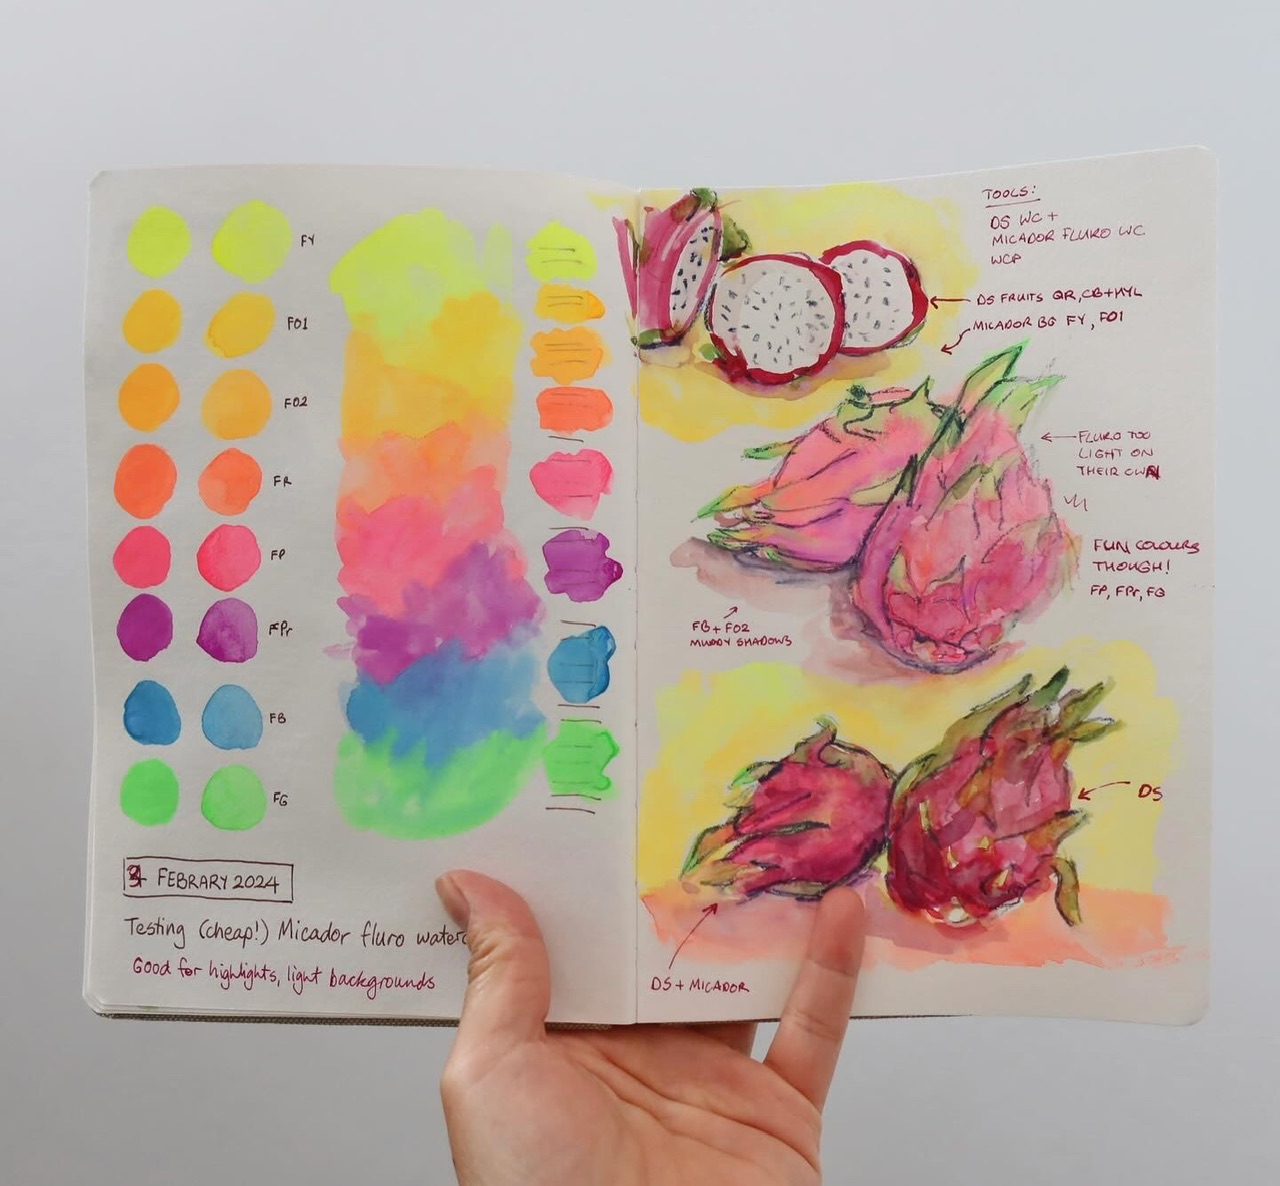 E05CE776-D569-4B95-A8A9-84F8DAC02AA1.jpeg|photo of a hand holding a sketchbook with fluoro colour swatches and paintings of dragonfruit in bright colours